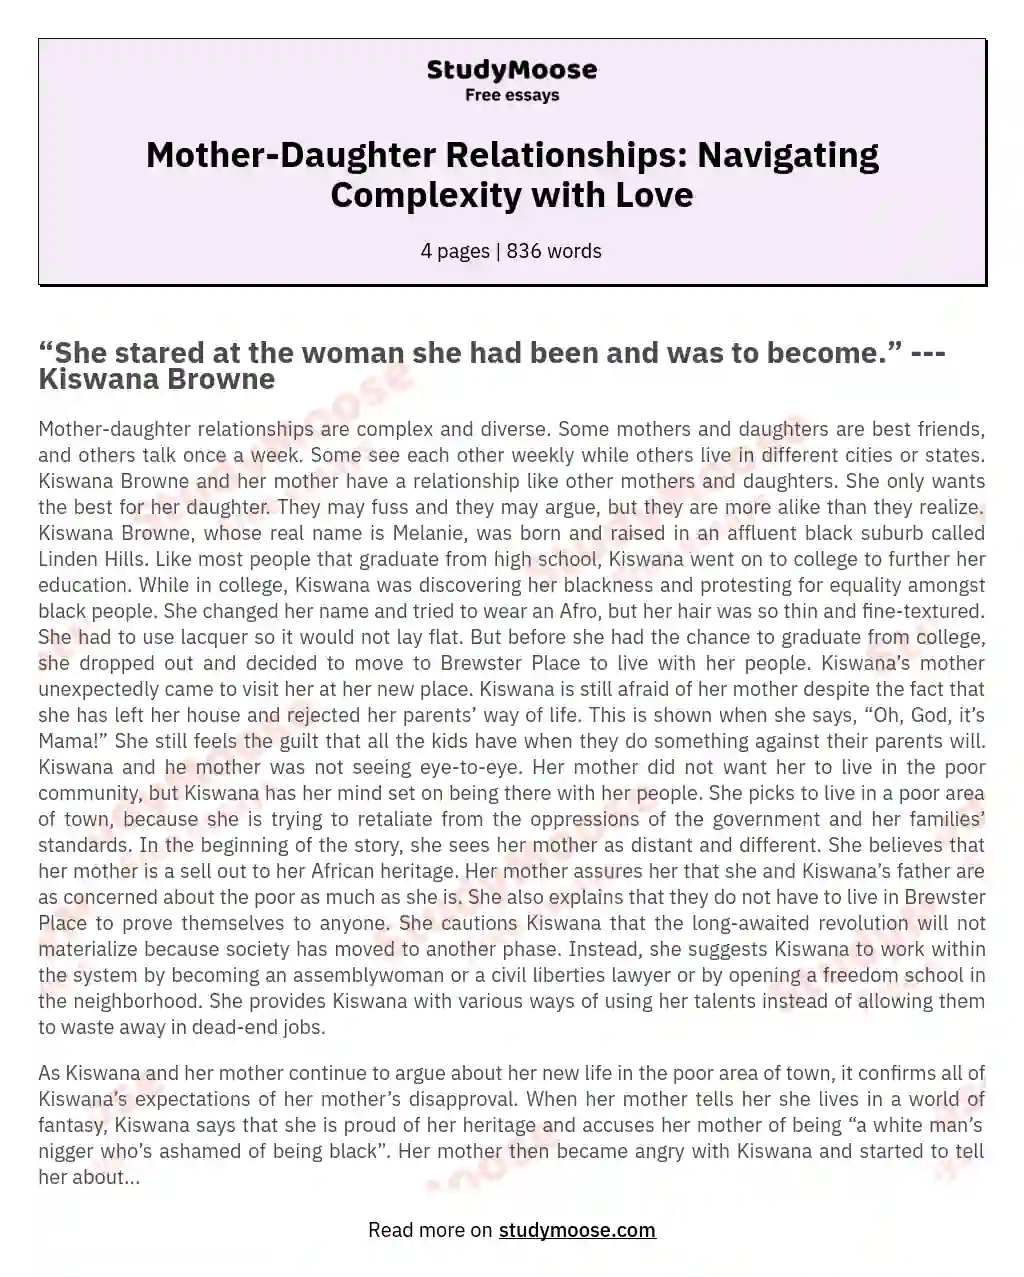 Mother-Daughter Relationships: Navigating Complexity with Love essay